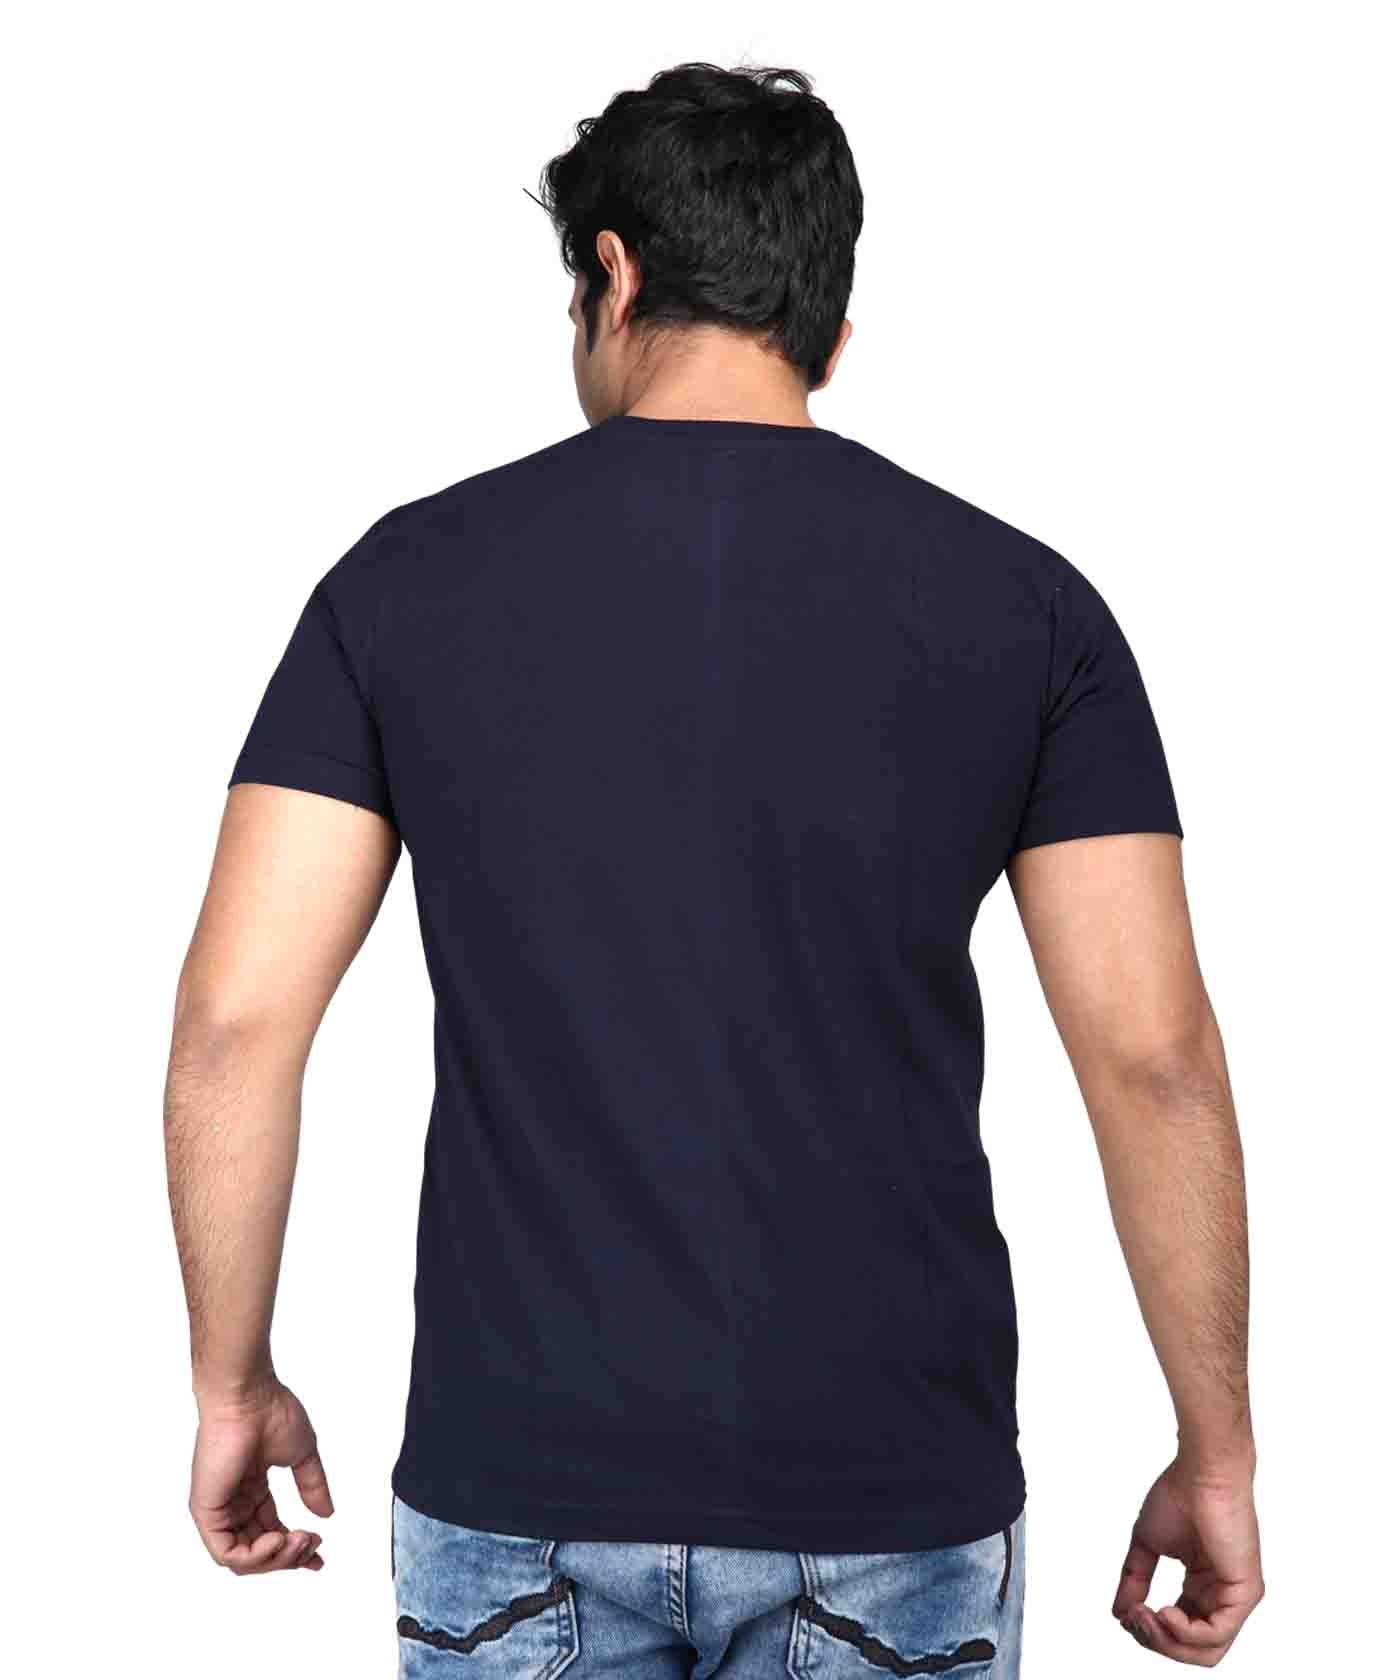 Keep Moving - Premium Round Neck Cotton Tees for Men - Navy Blue And Red